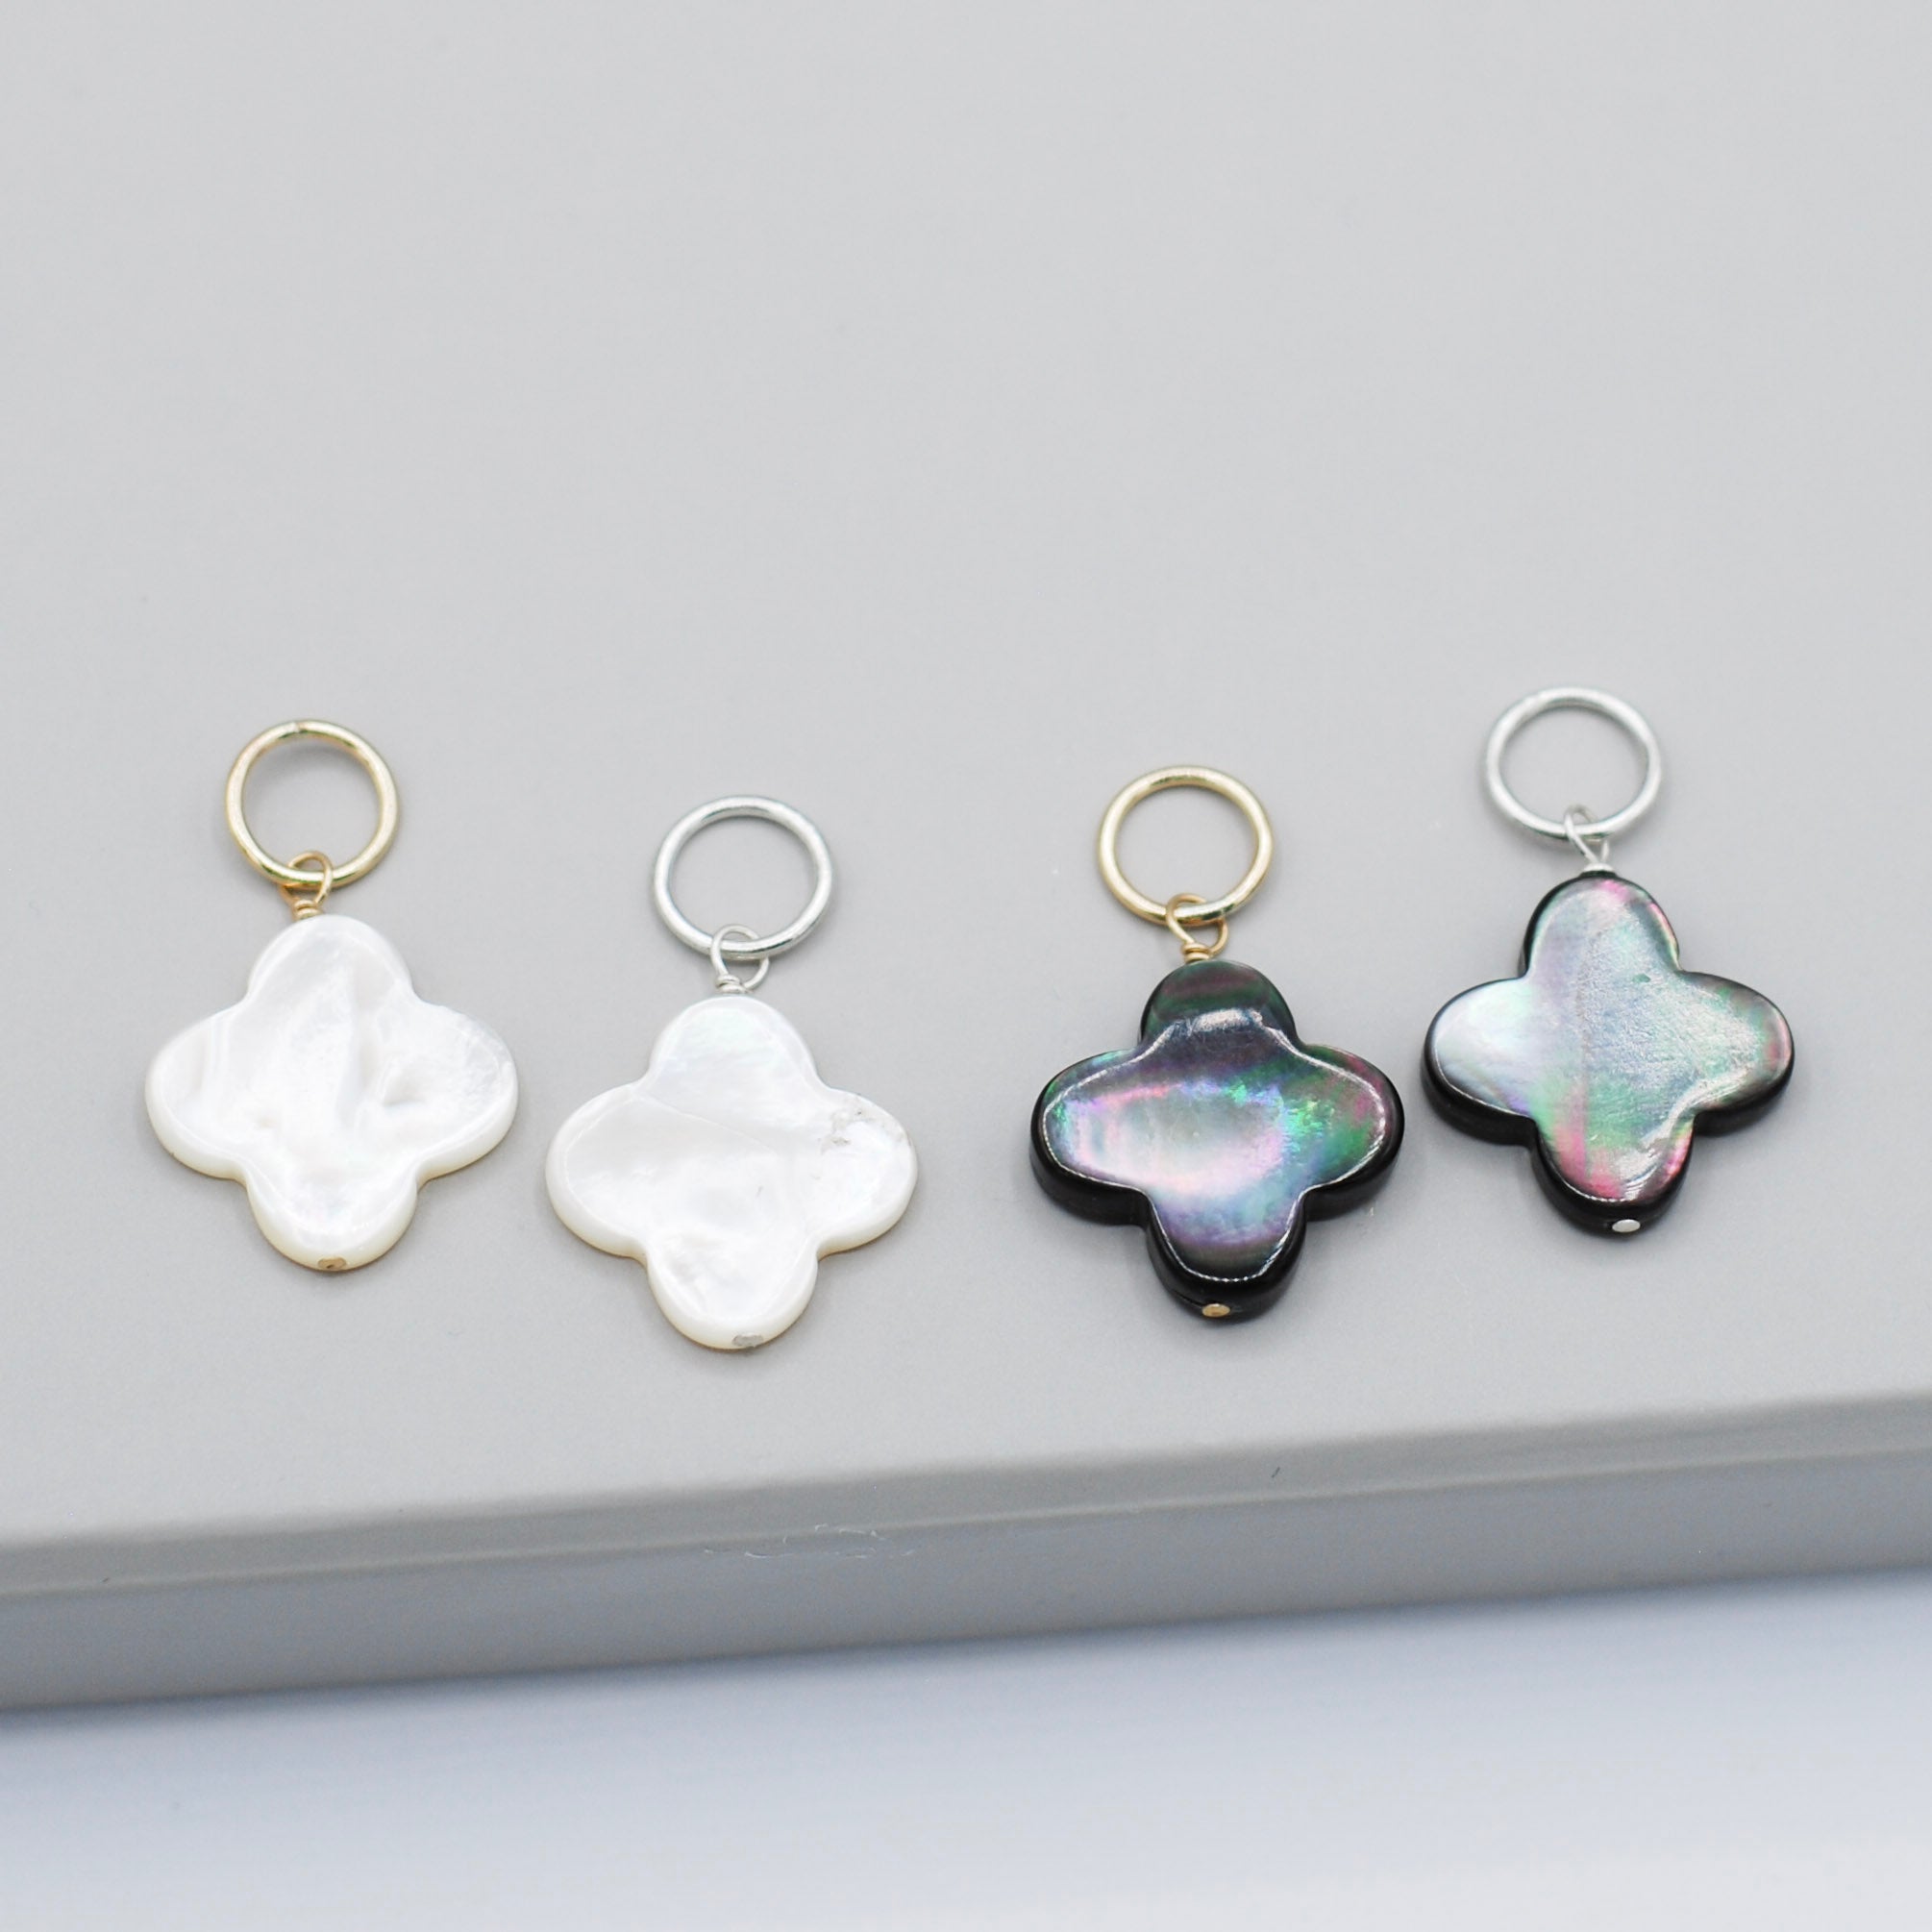 Mother of Pearl Clover Pendant